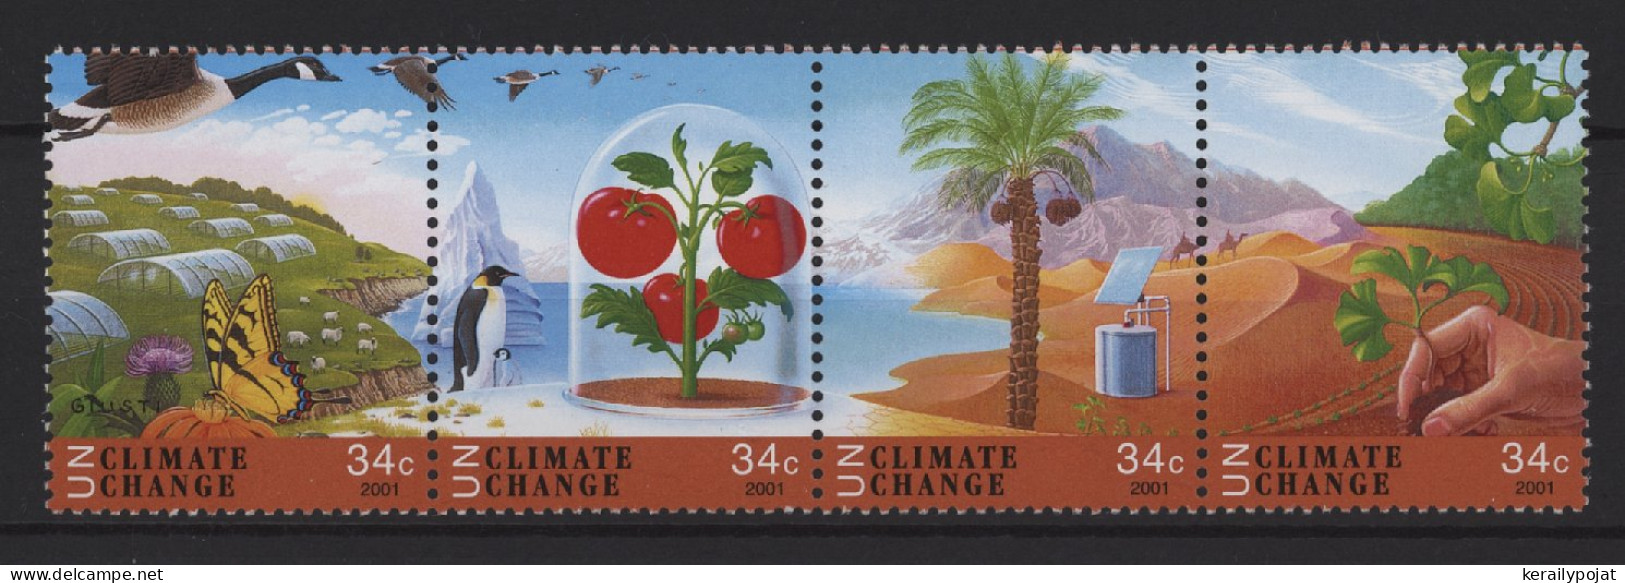 United States (UN New-York) - 2001 Climate Change Strip MNH__(TH-27316) - Unused Stamps